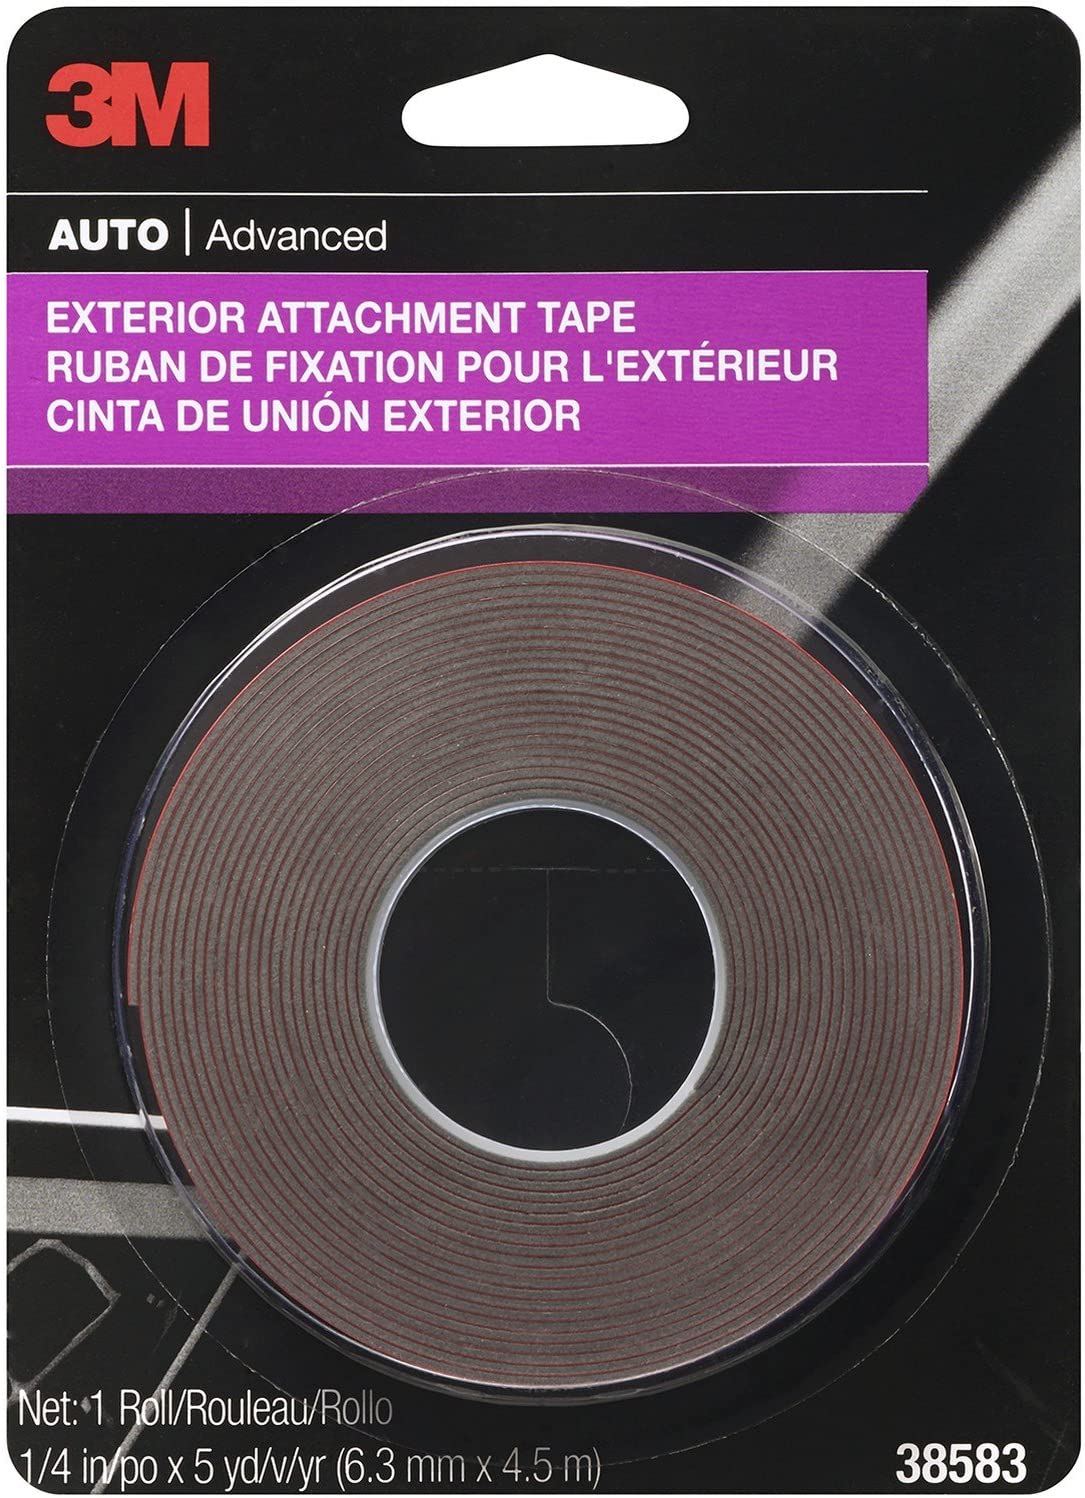 3M Exterior Attachment Tape, Ideal for Moldings, Emblems and Trim, 1/4 in width x 5 yards in length, 1 roll